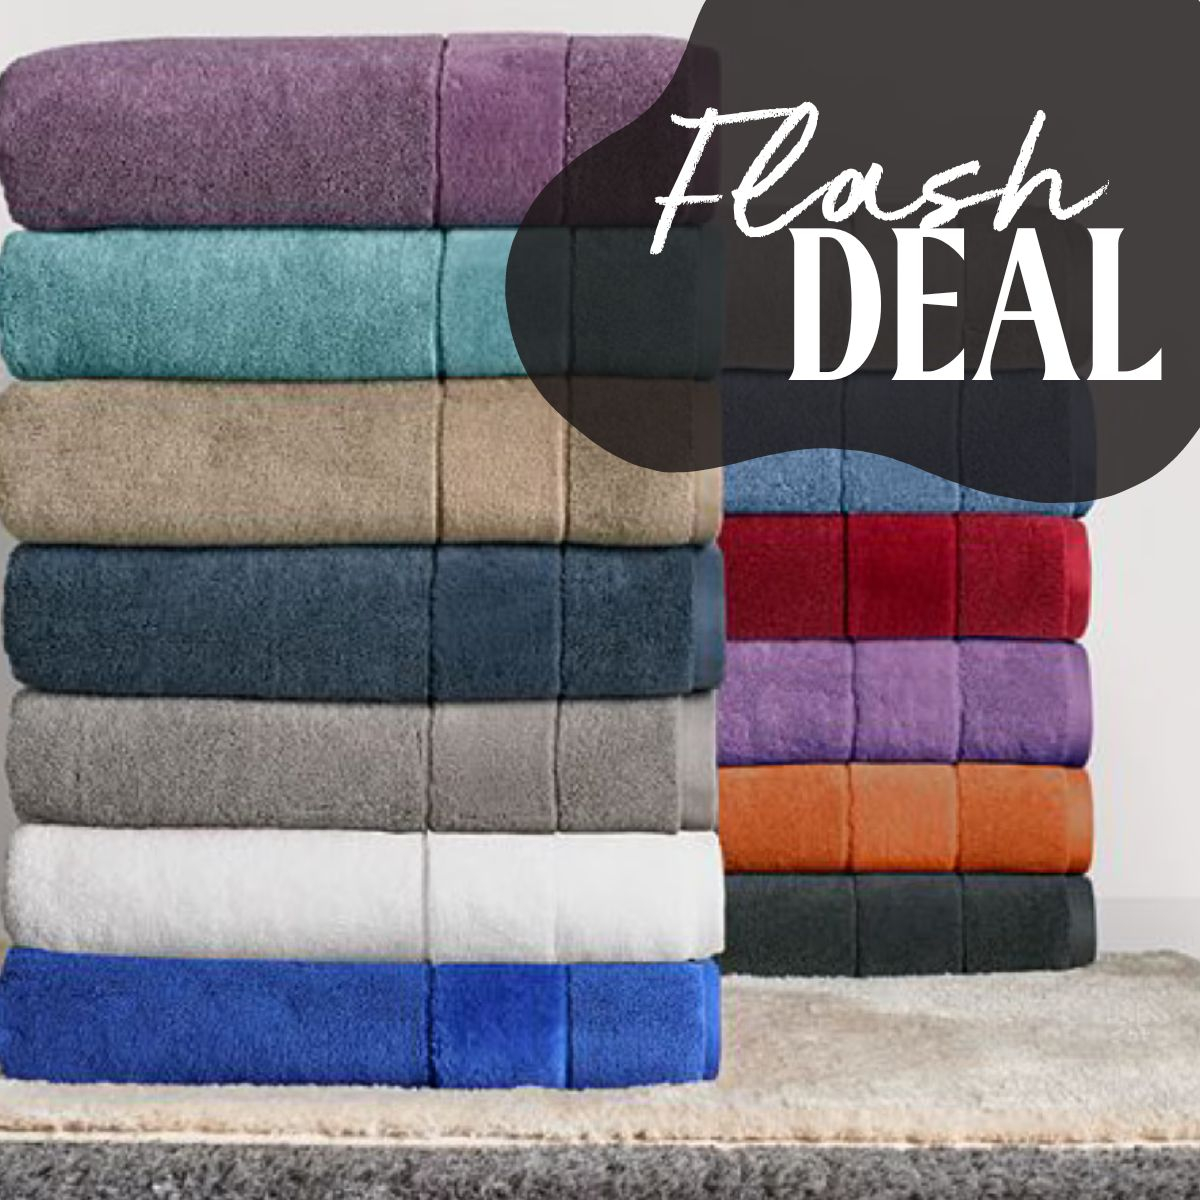 Kohl’s Memorial Day Sale Has Best-Selling Bath Towels for Just $4